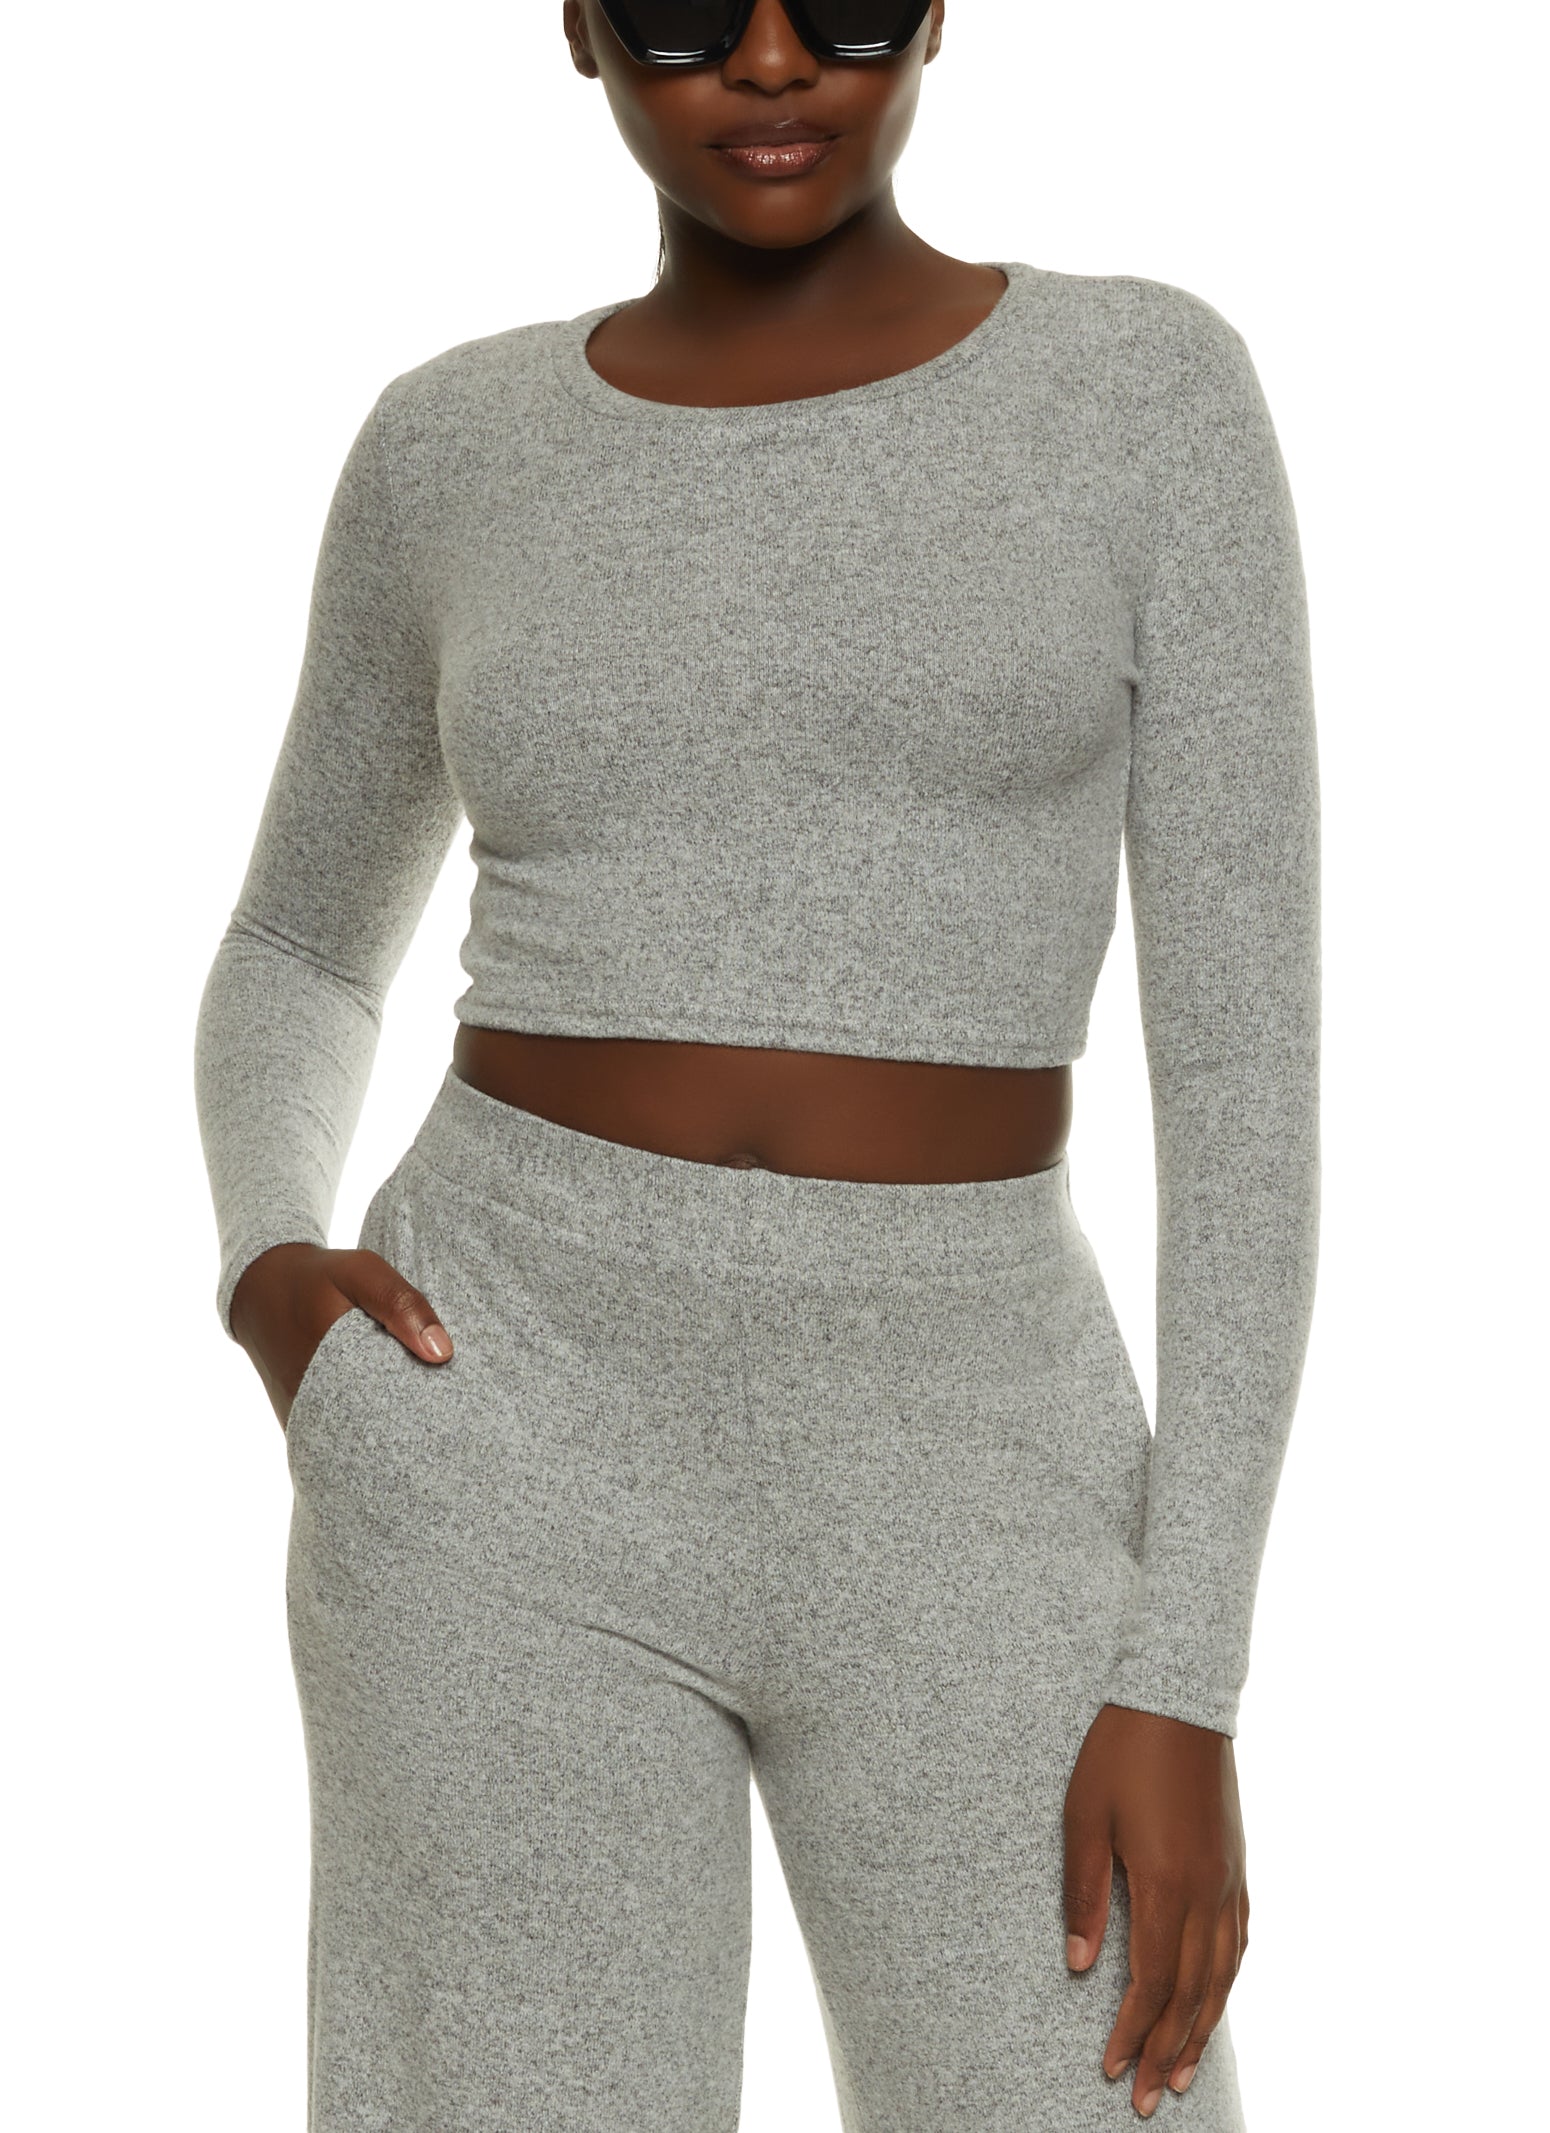 Long Sleeve Crop Tops, Everyday Low Prices